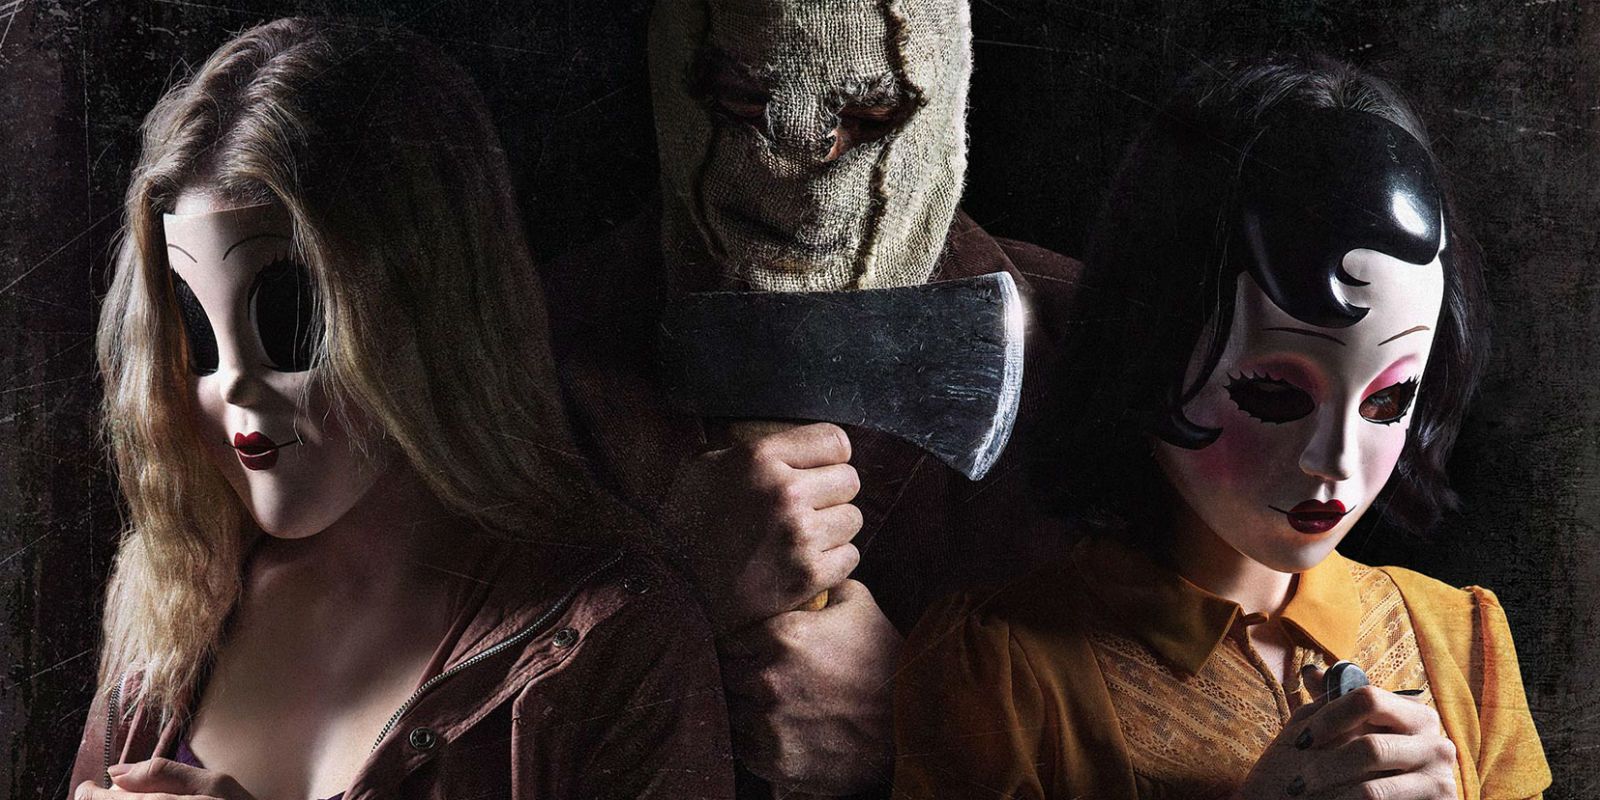 Unused The Strangers 2 Ending Confirmed Fate Of Man In The Mask